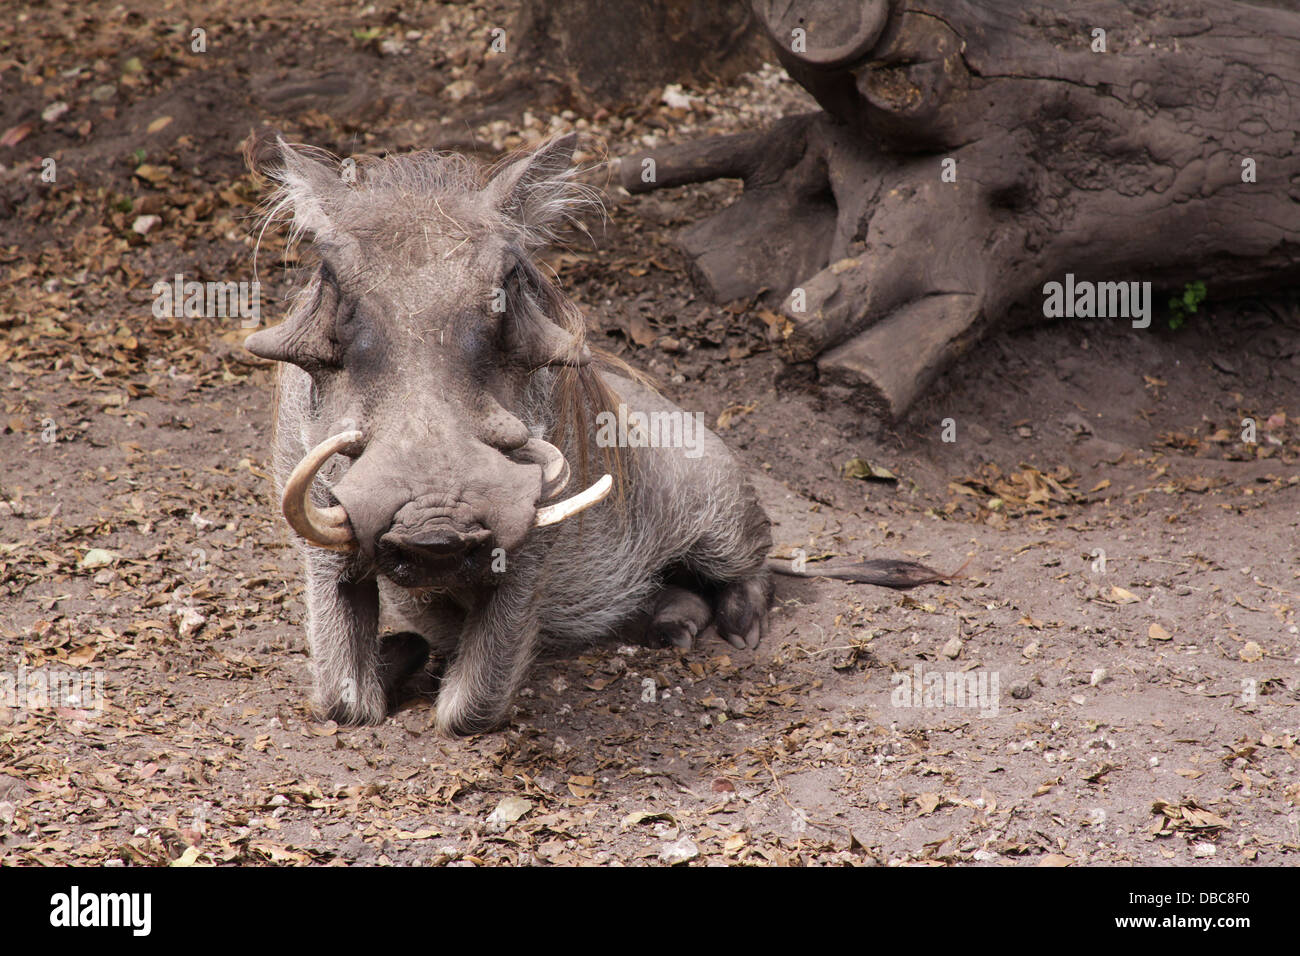 Warthogs (Phacochoerus africanus) sitting in the ground at the Miami ...